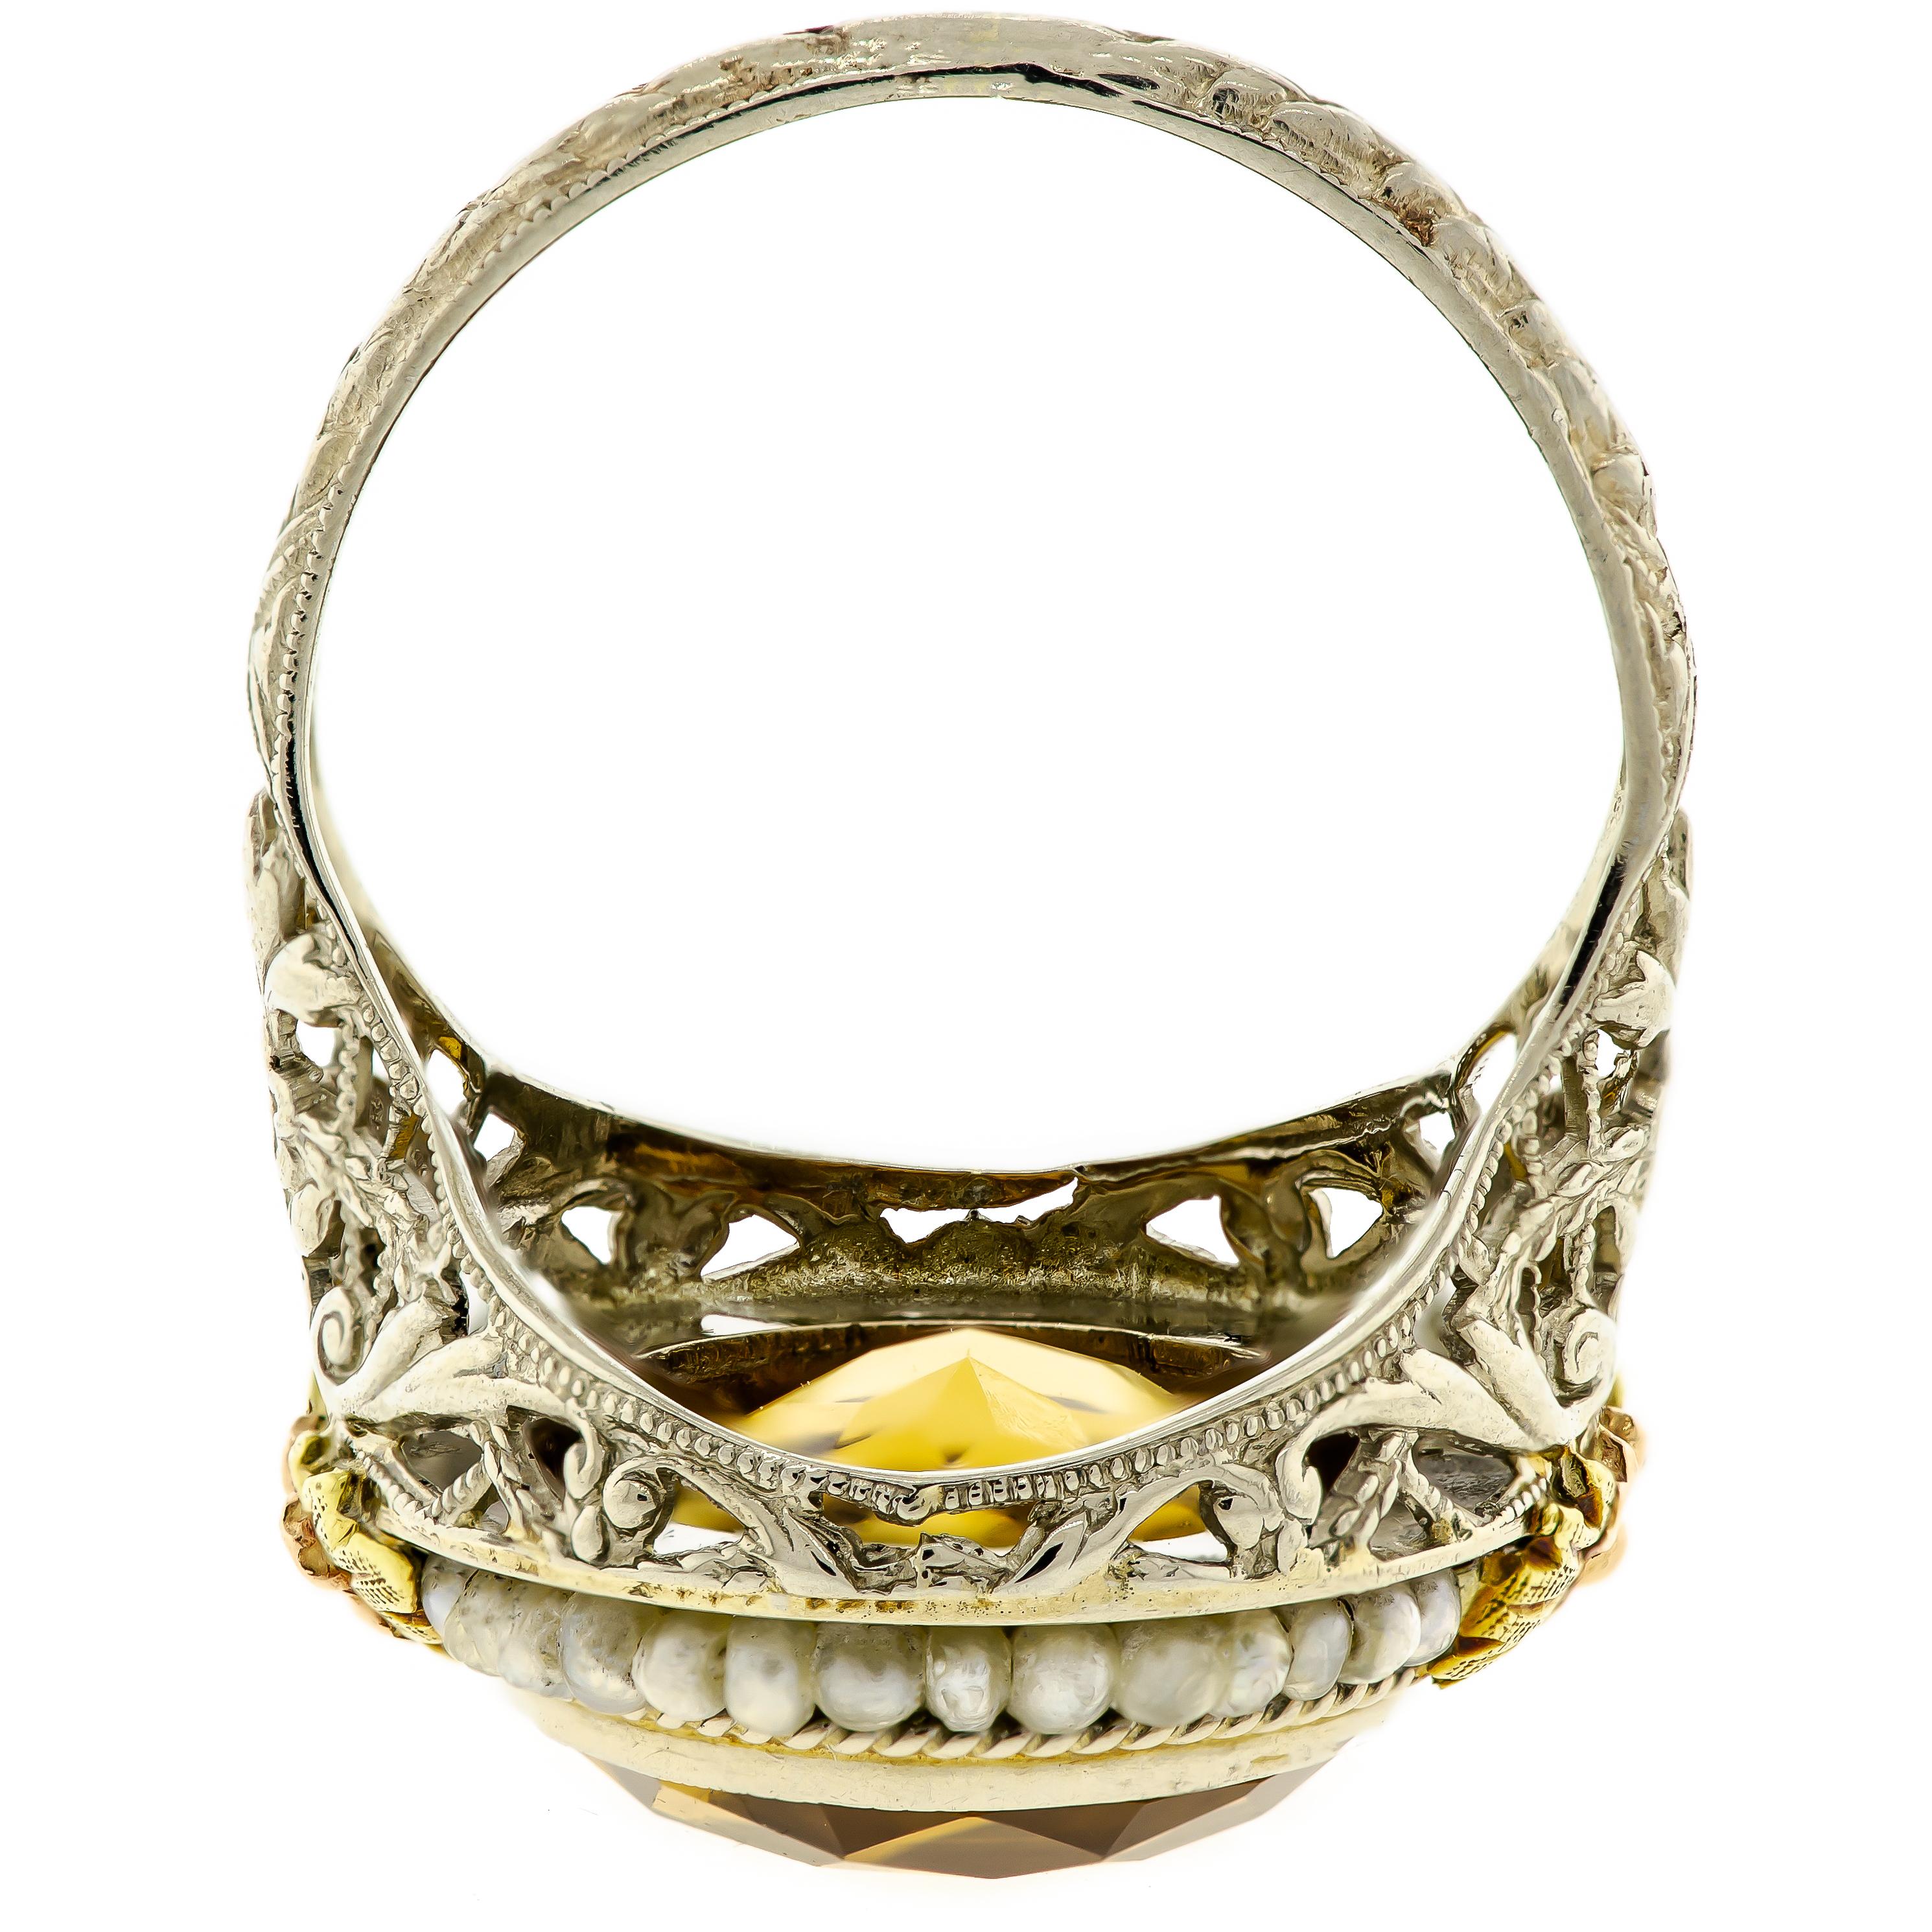 Lovely Art Deco Citrine Seed Pearl White and Yellow Gold Filigree Ring 1